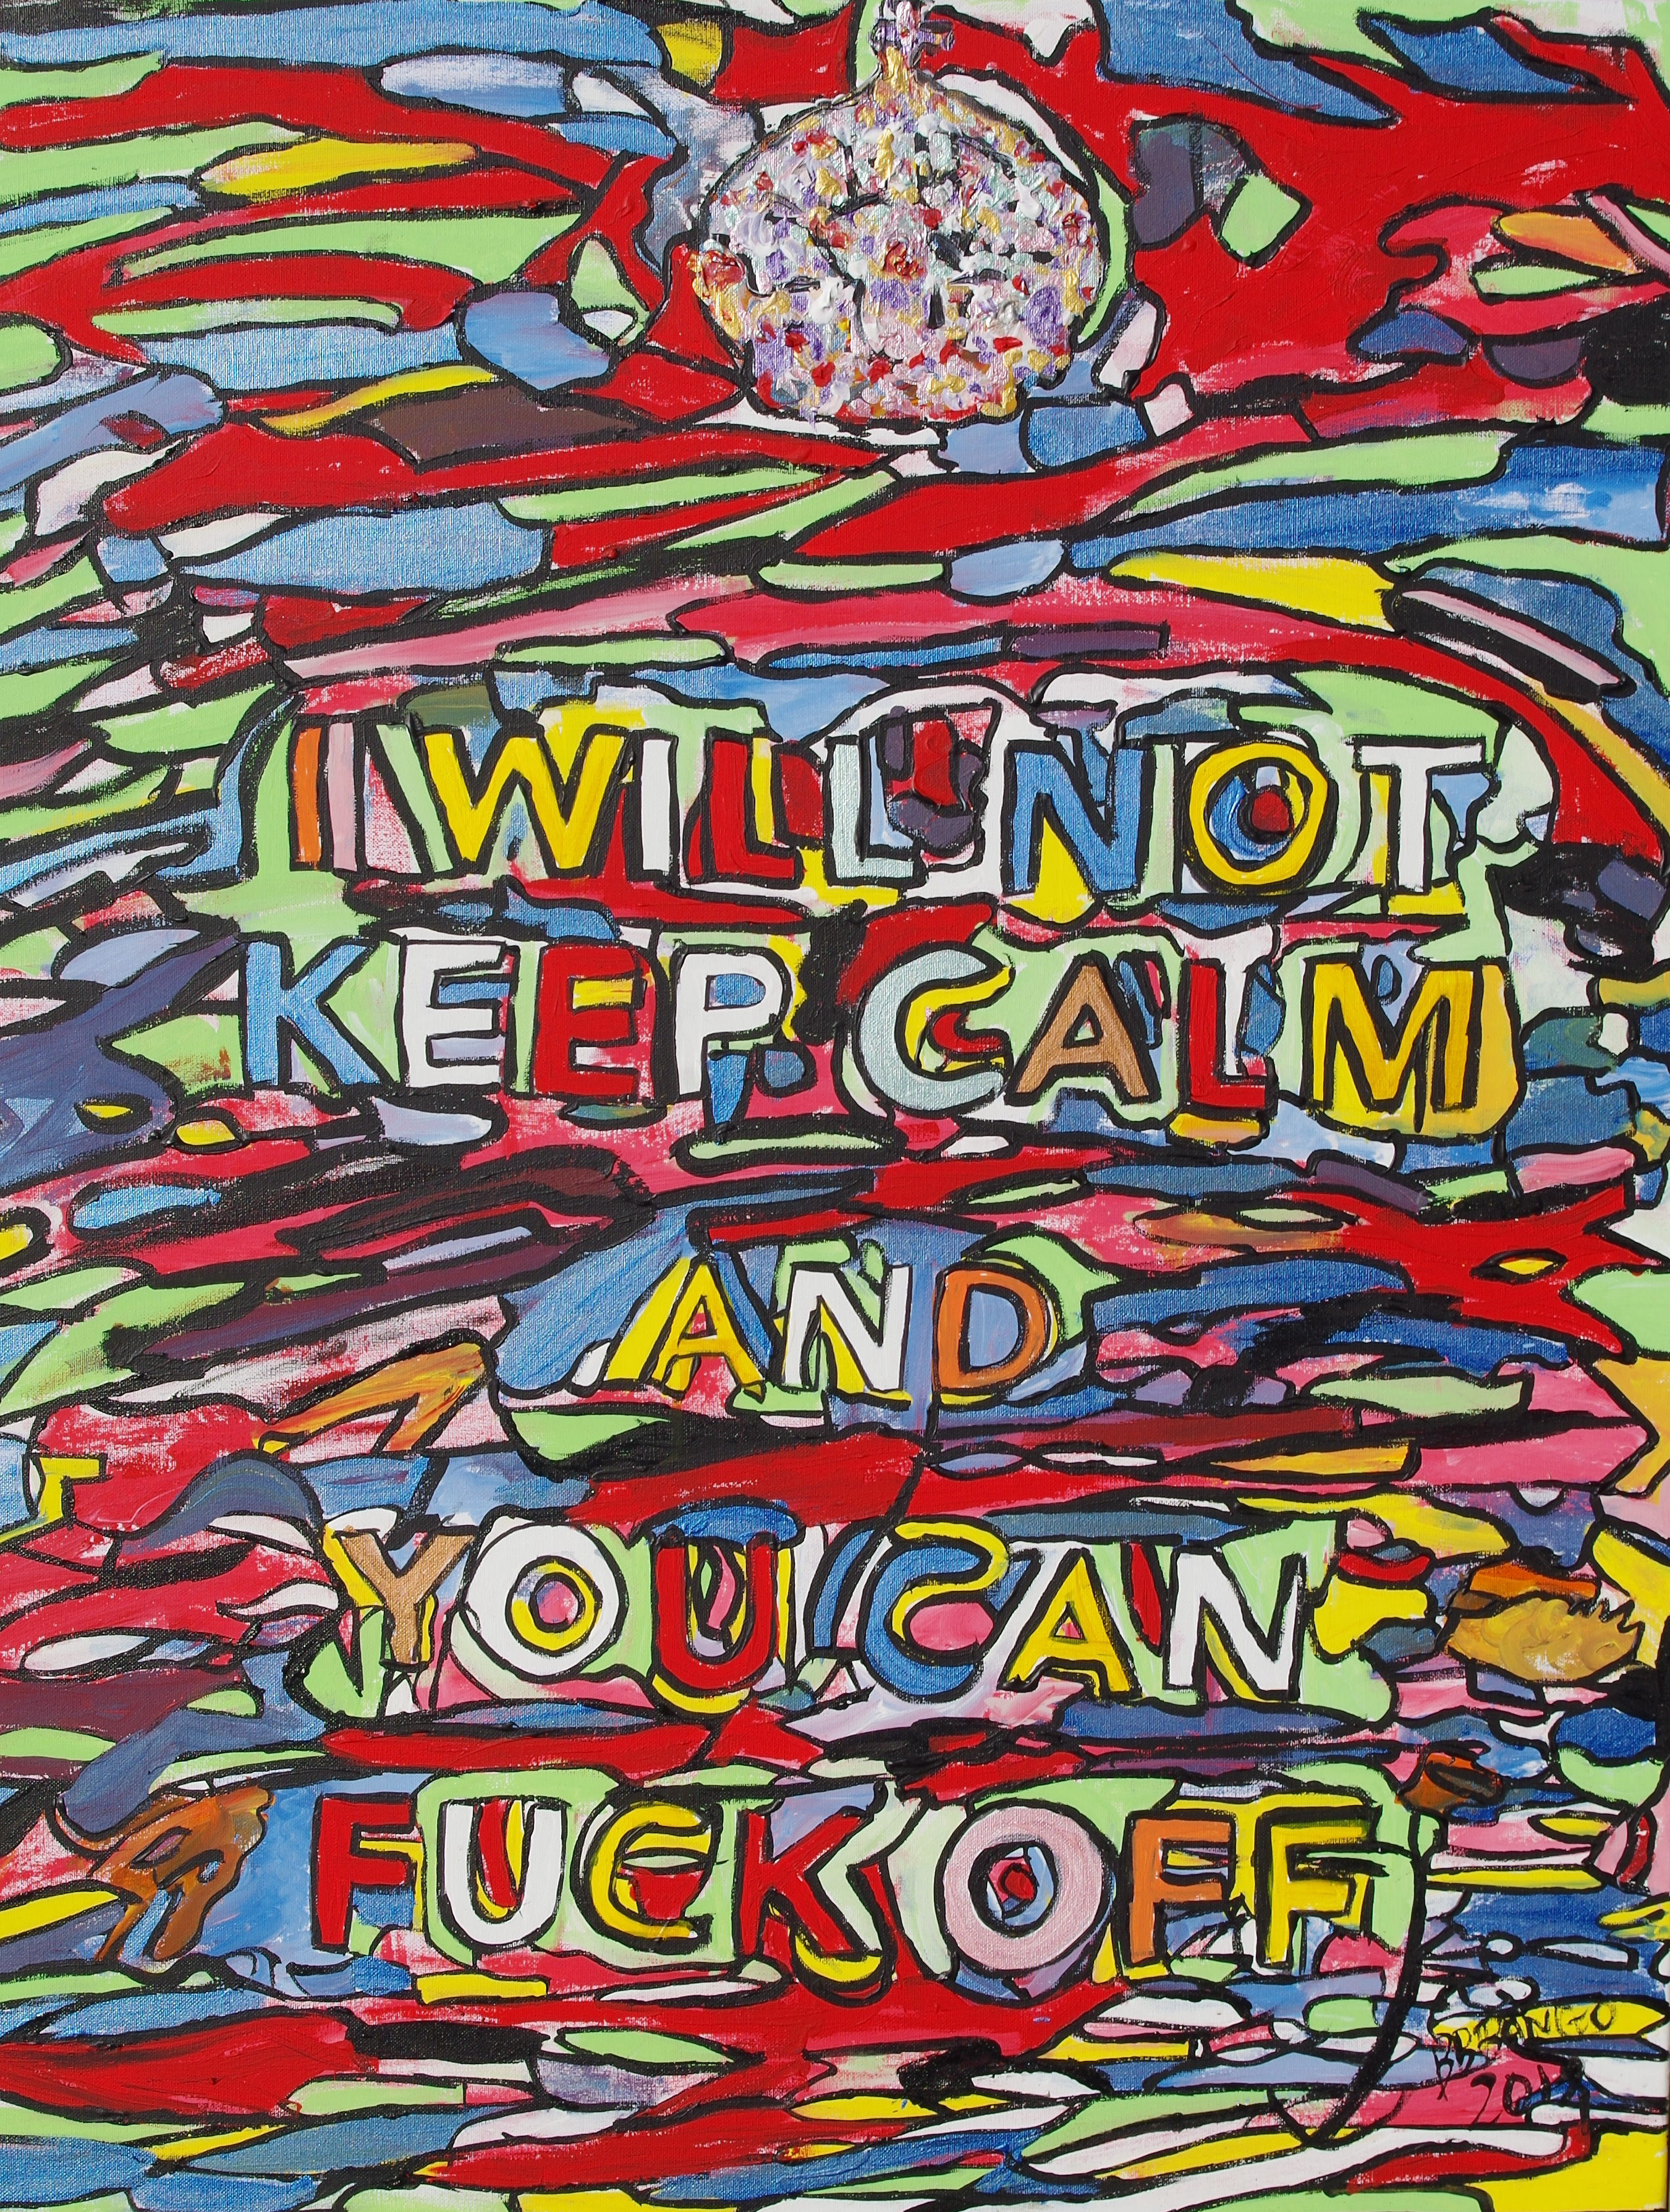 'I will not keep calm and you can f**k off' by BB Bango  40 by 30 inch acrylic on canvas. Sold via Saatchi Online to Canadian collector. Another 12 versions of this painting has been sold to UK collectors